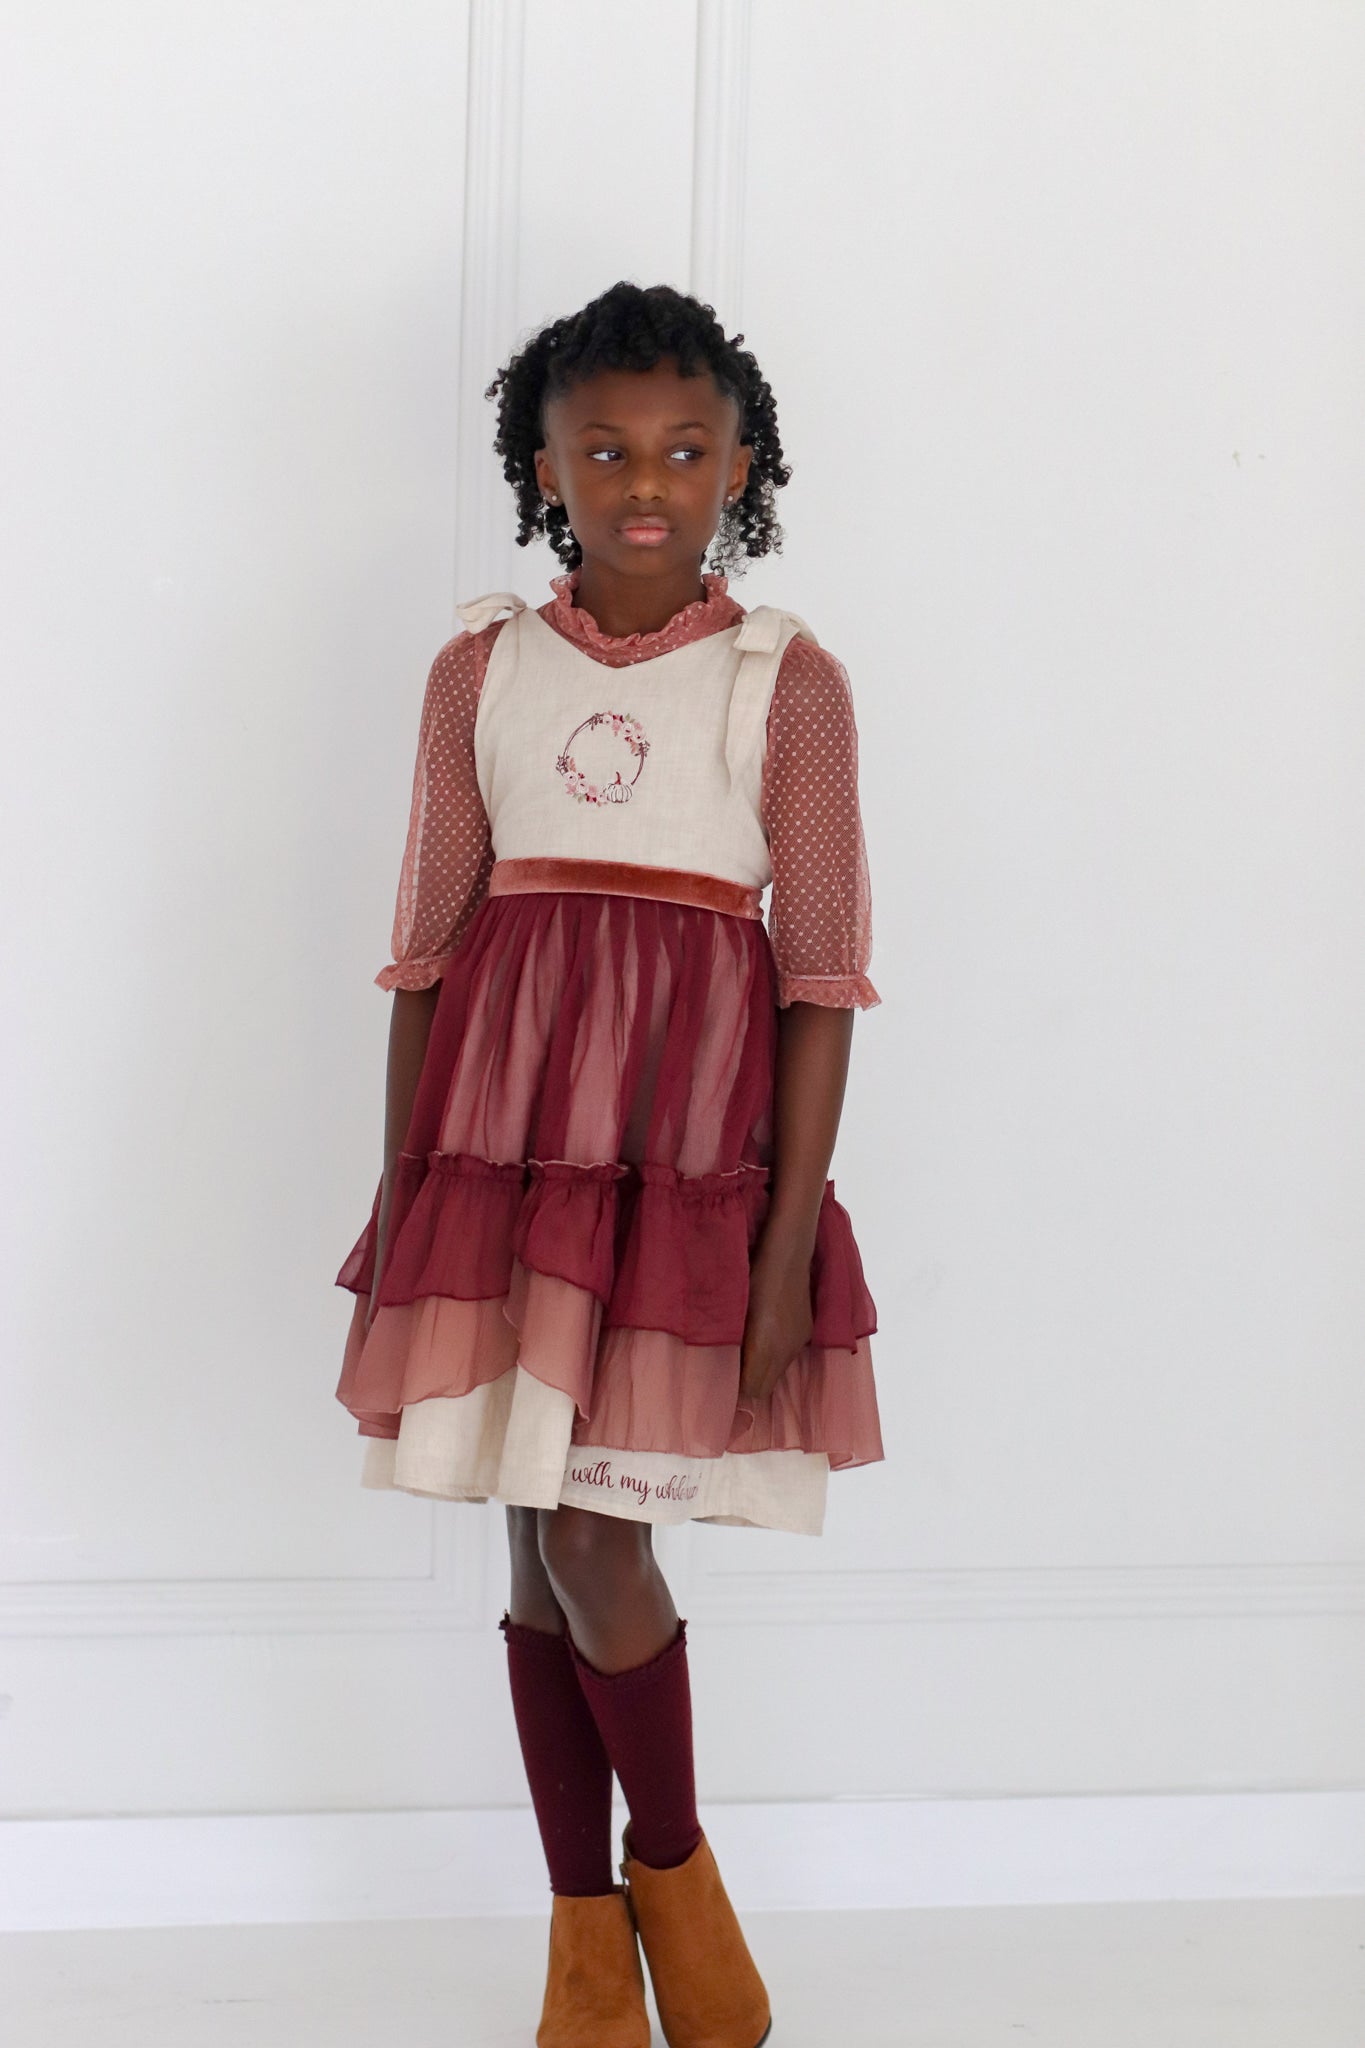 Thankful Heart Wheat, Blush, and Maroon Embroidered Dress and Undershirt - Evie's Closet Clothing